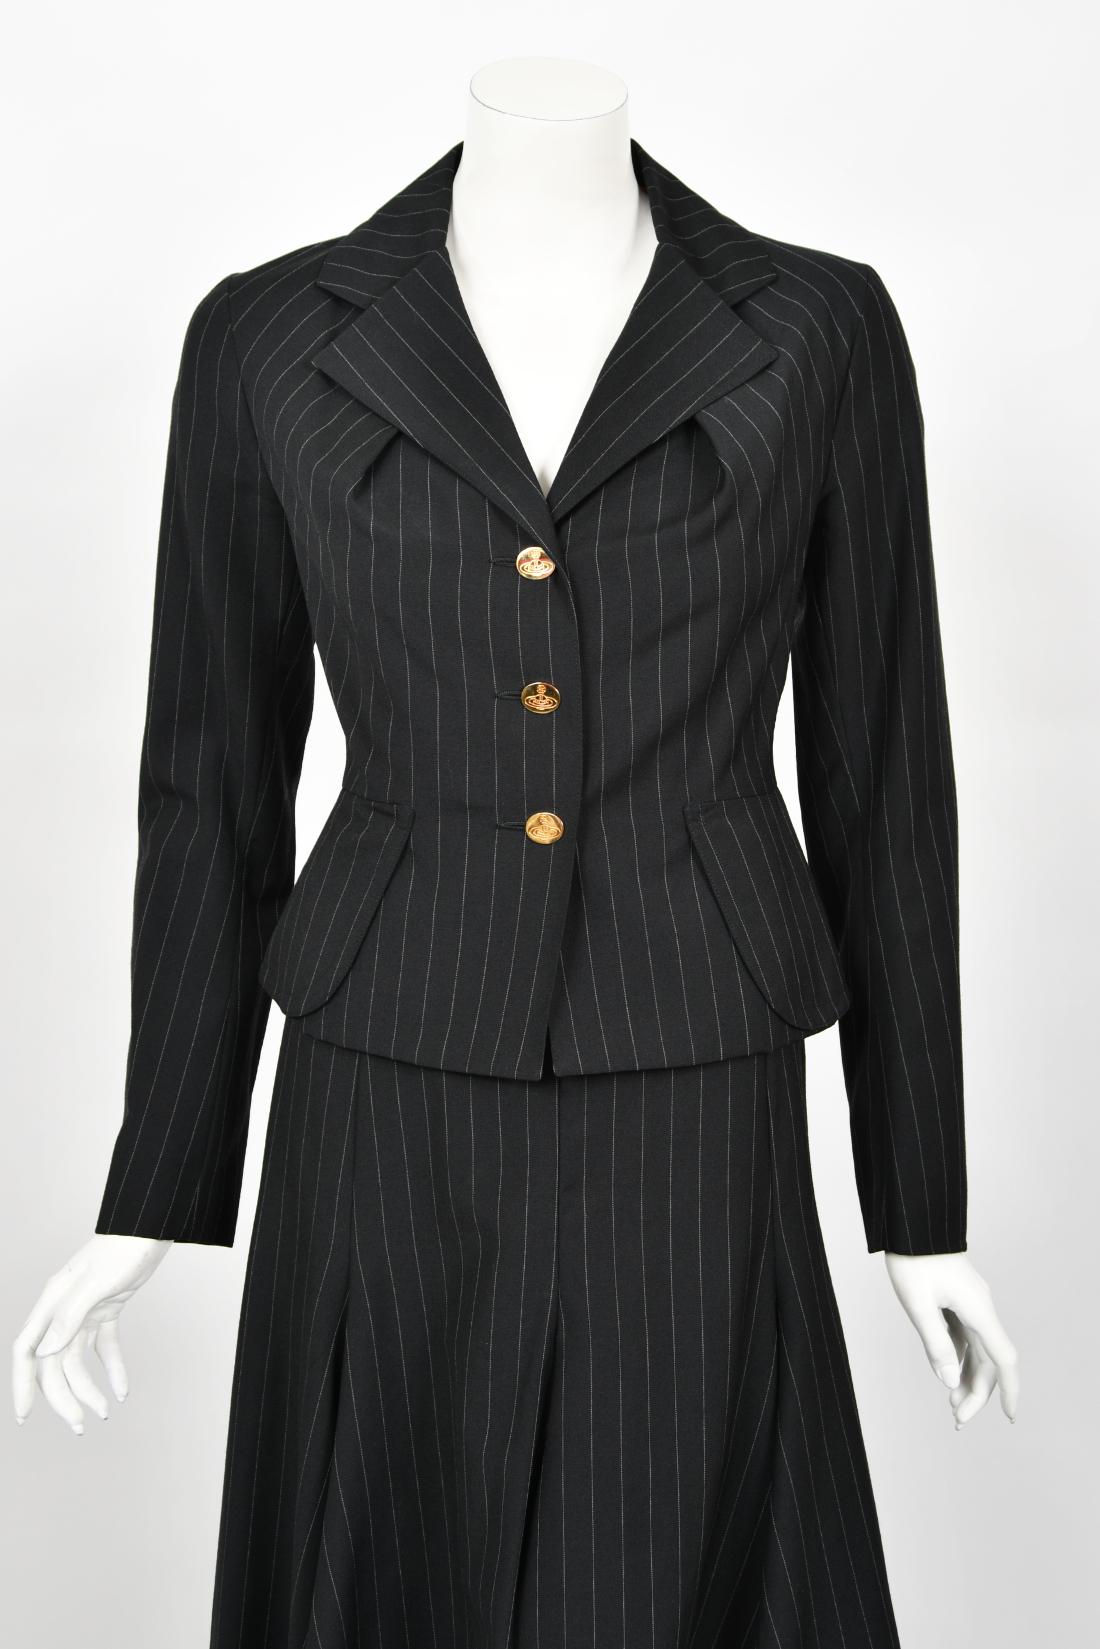 Archival 1994 Vivienne Westwood Pinstripe Wool Jacket and High-Low Trained Skirt For Sale 2